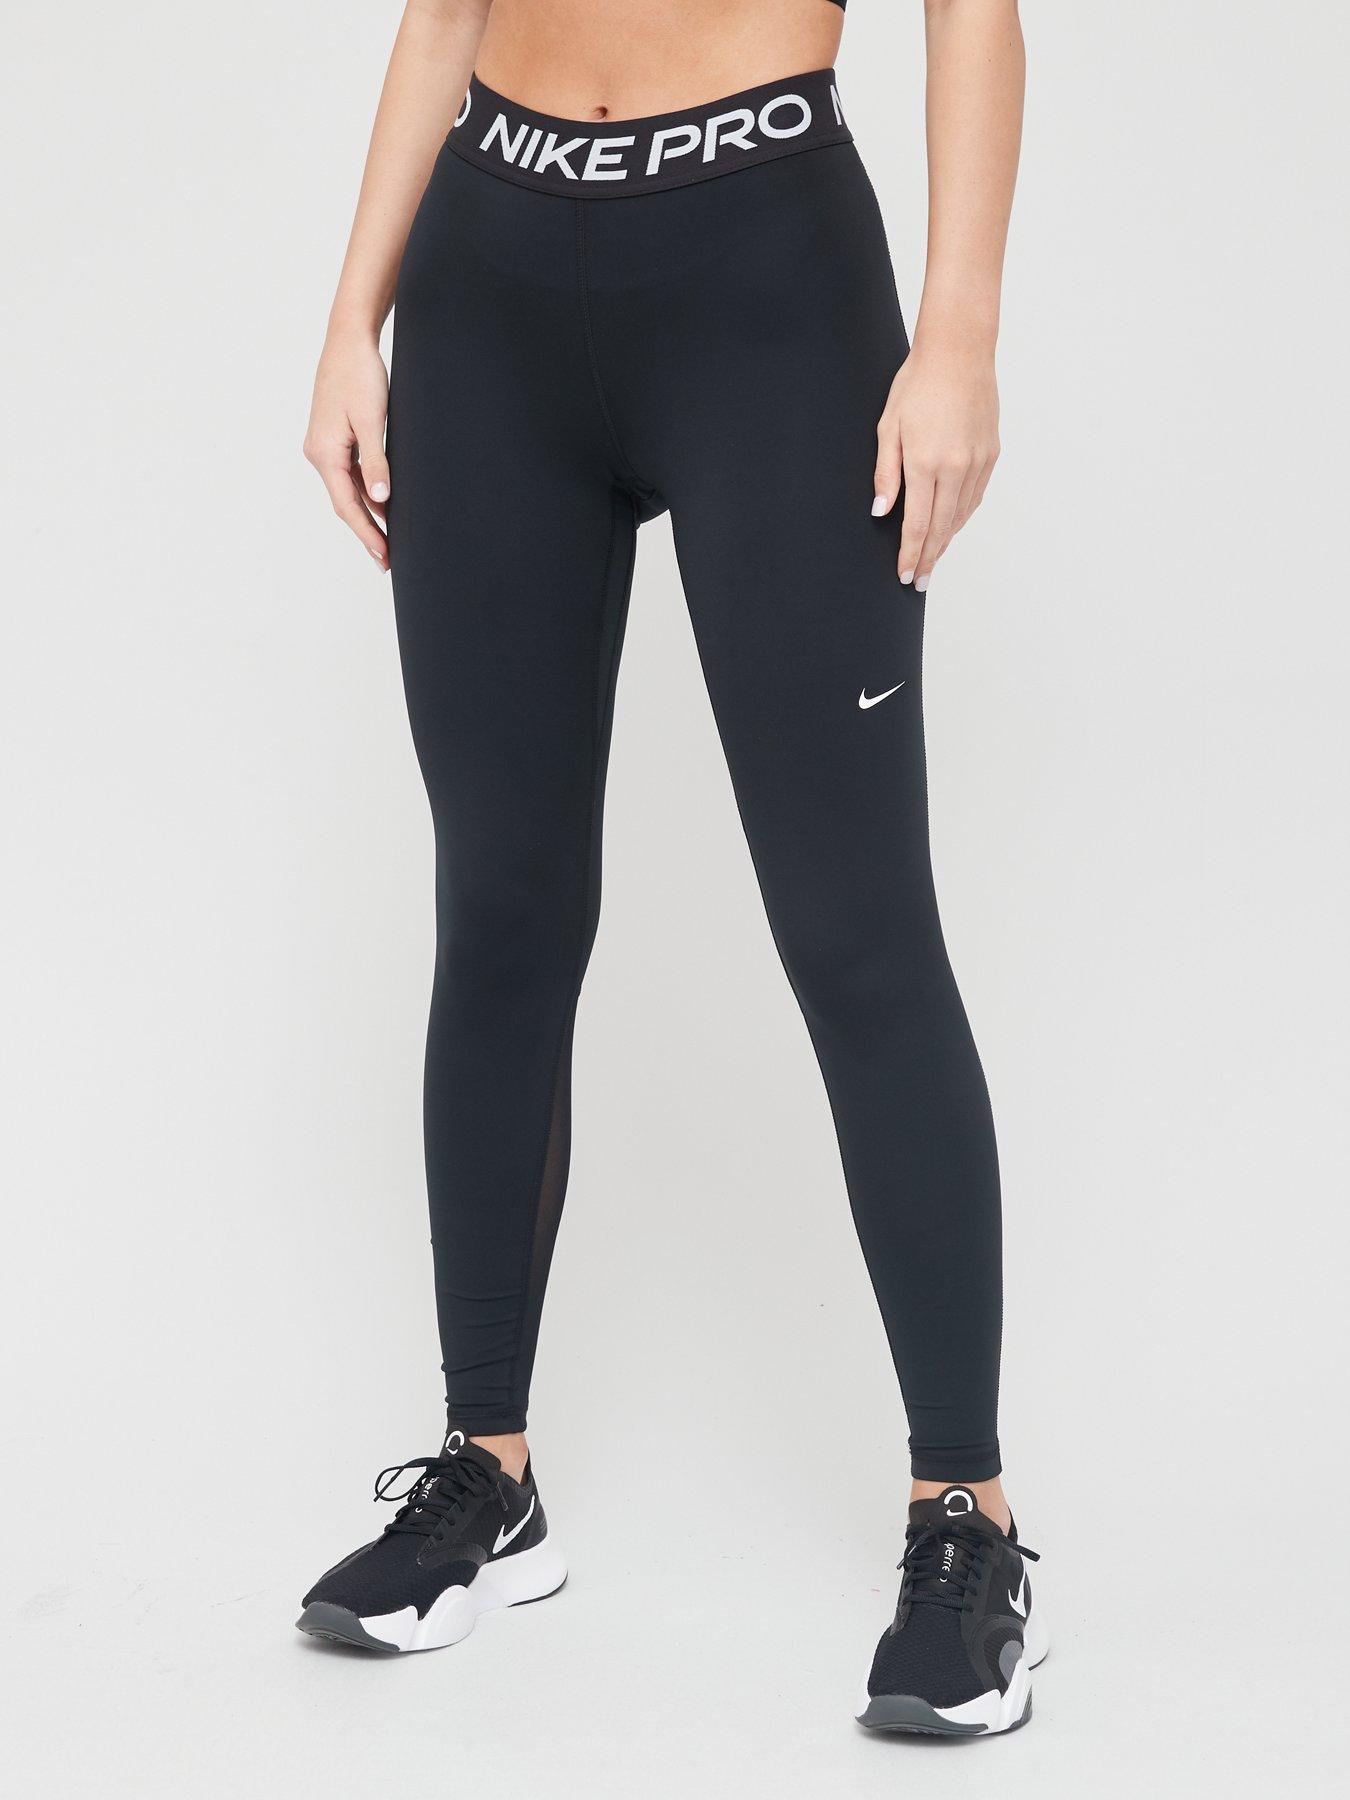 Nike Pro Training swoosh bra and leggings in navy and rose gold